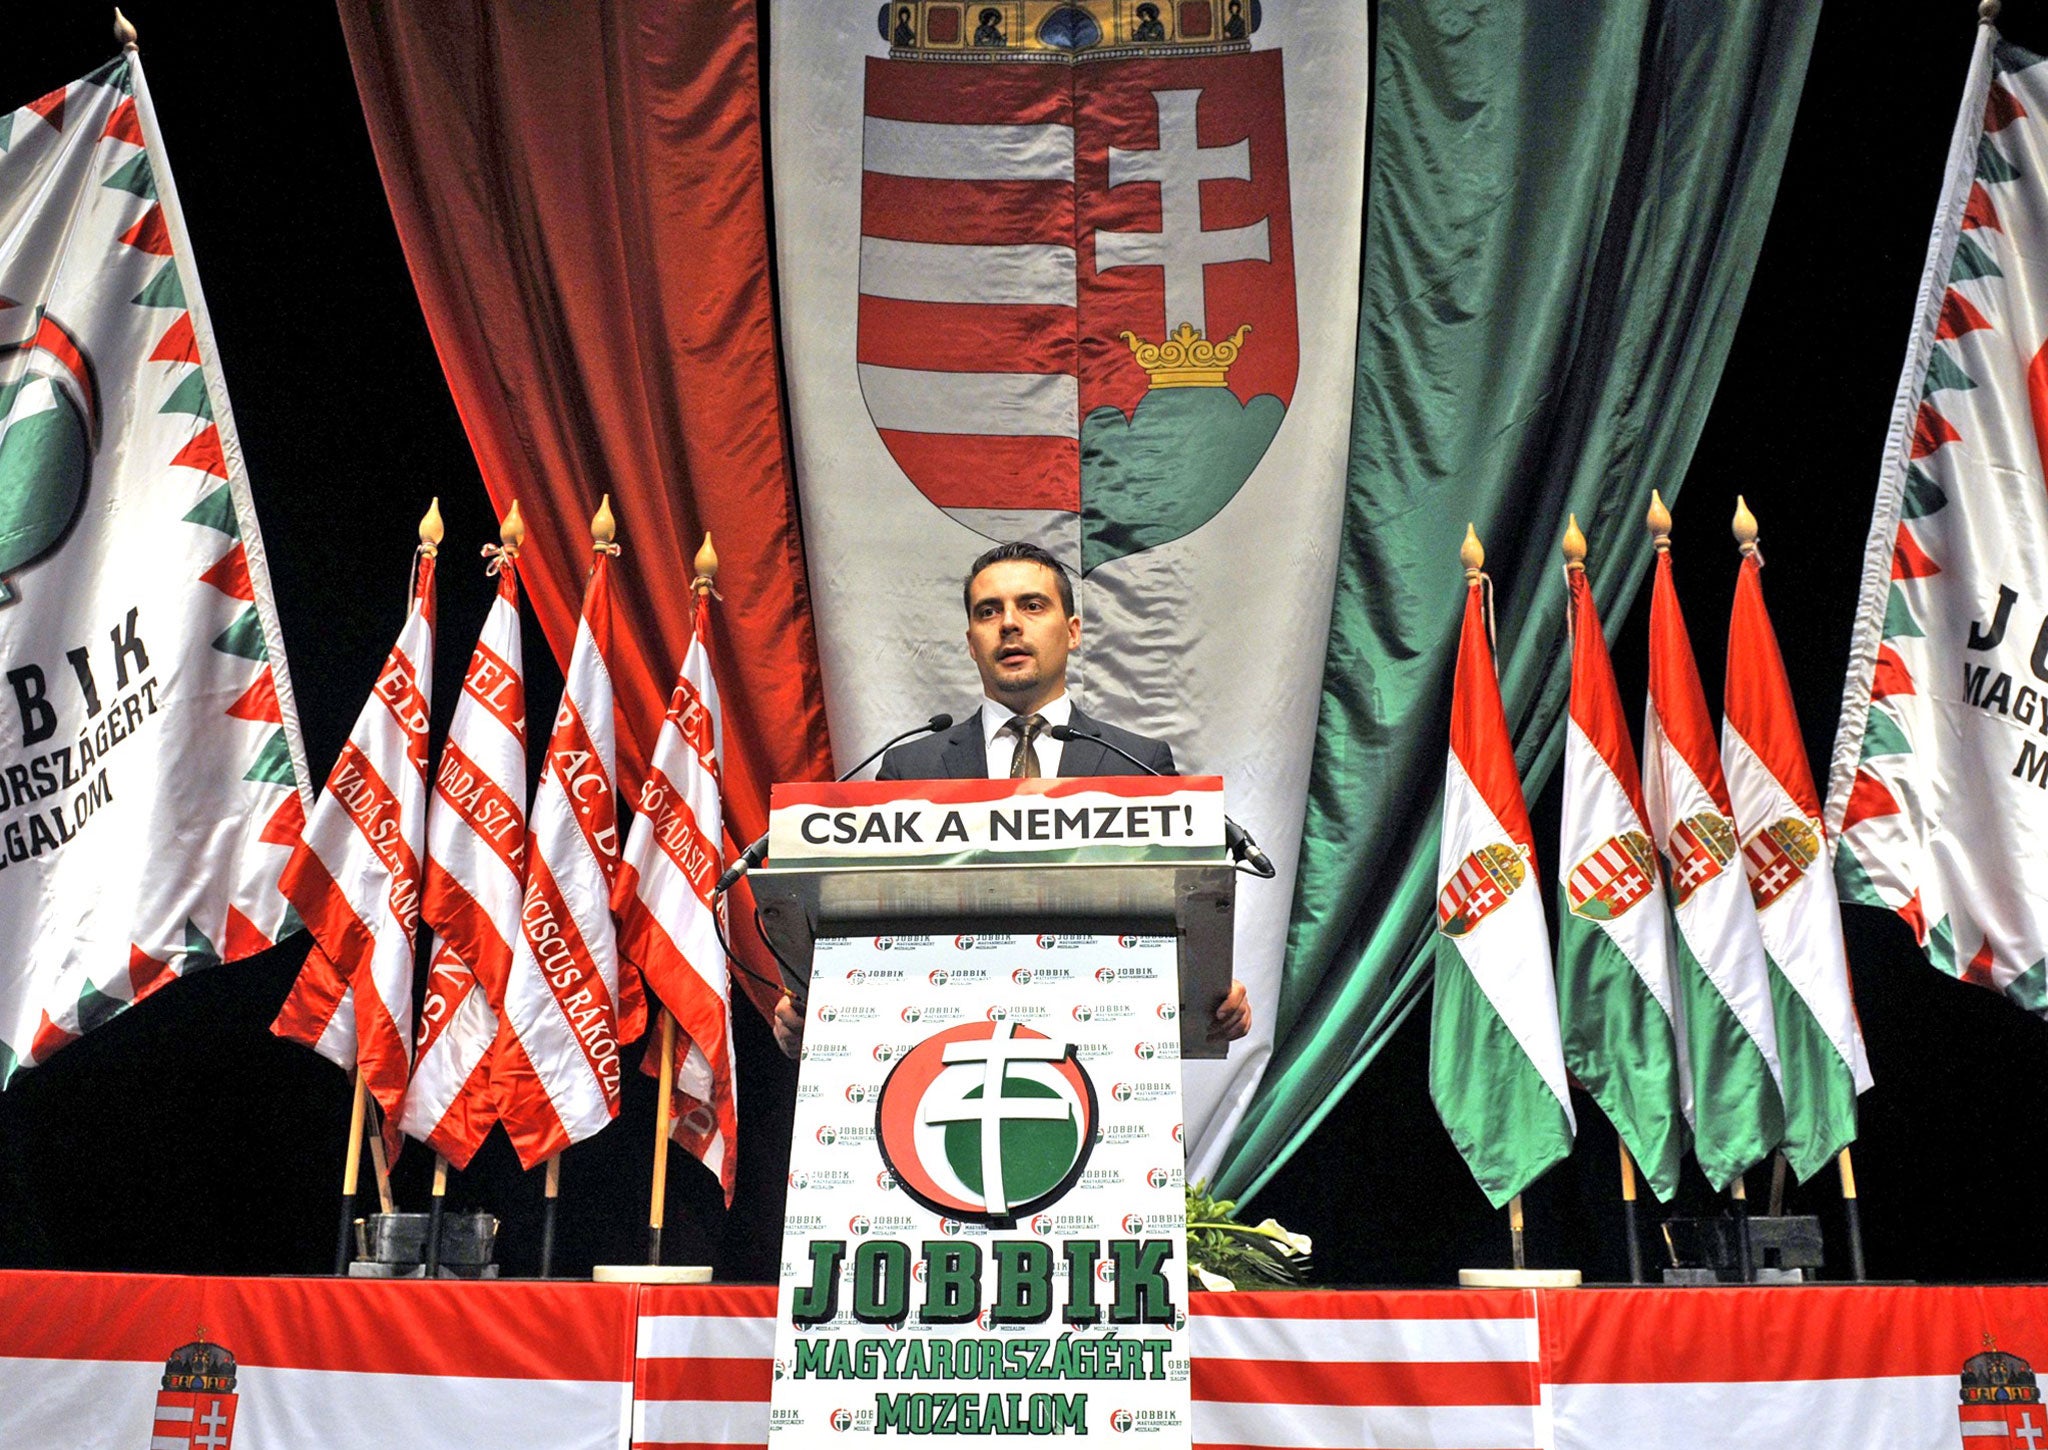 Jobbik leader Gabor Vona is coming to London this weekend to host a rally